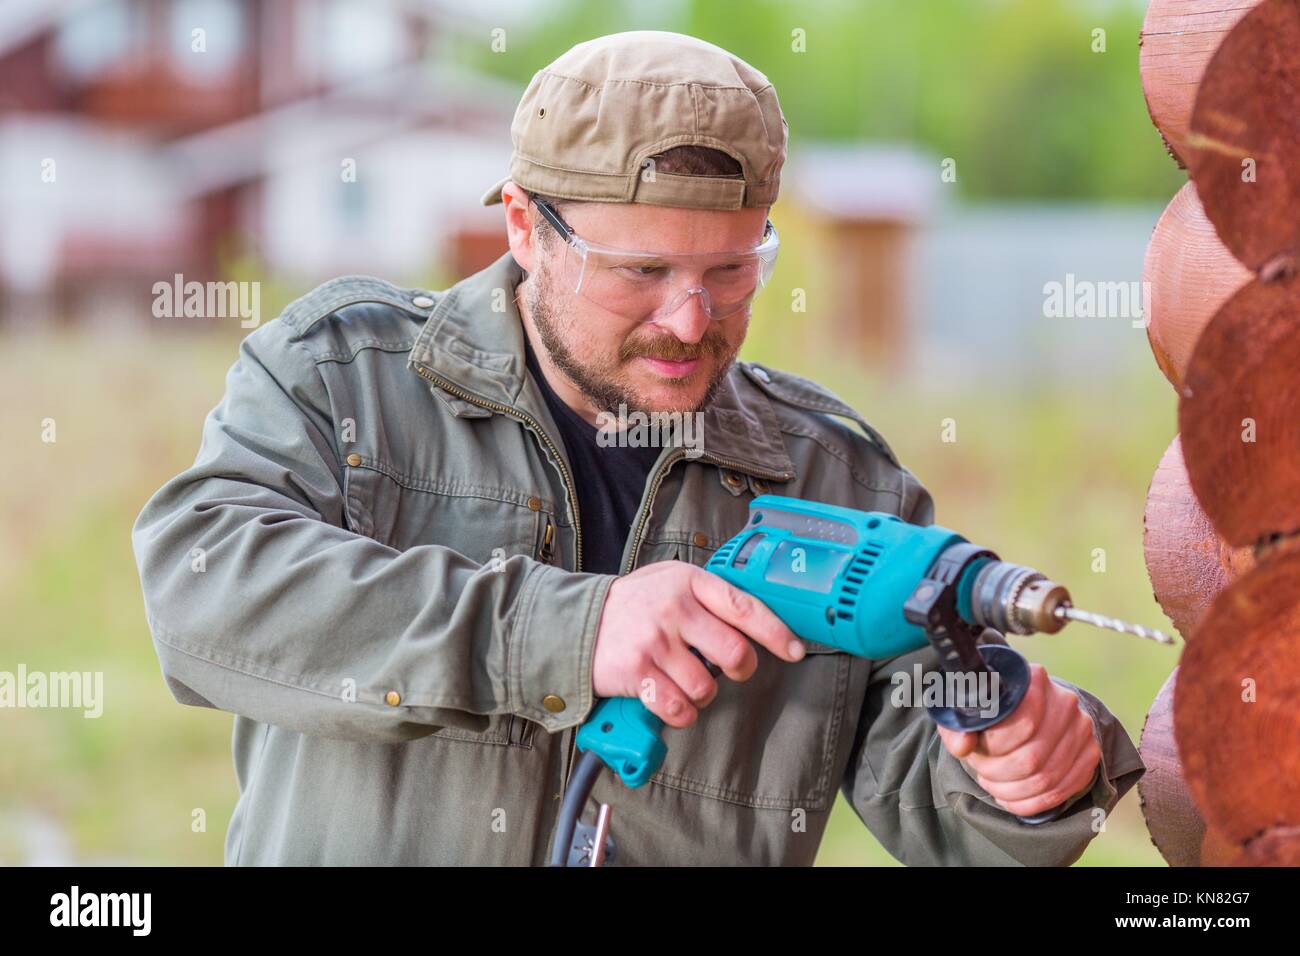 Worker with a drill in safety glasses working in a wooden cottage. Stock Photo